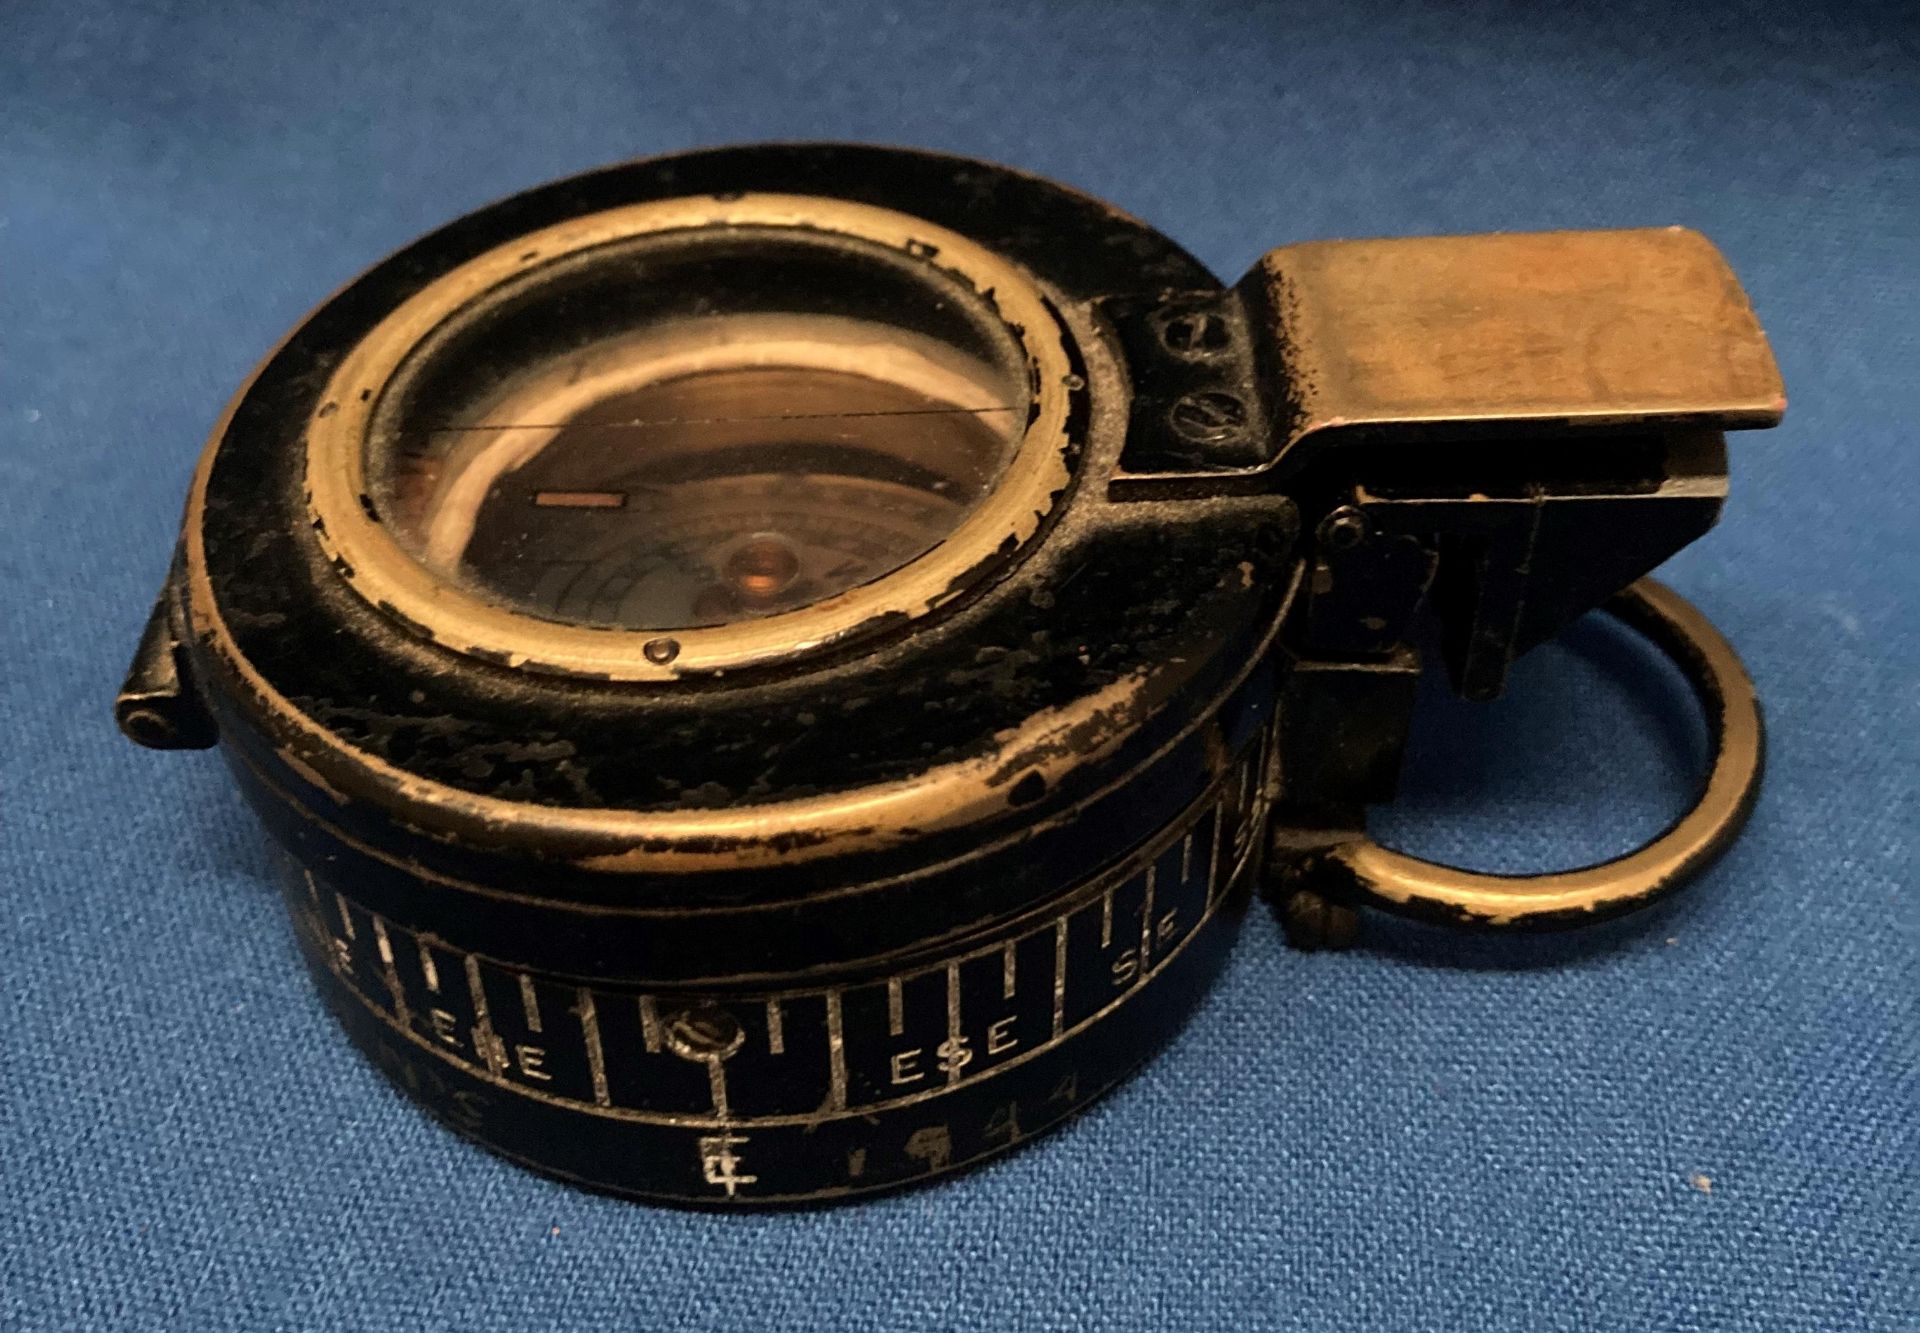 ATG Co Ltd London 1940 Mark III metal and brass naval compass no. - Image 5 of 5